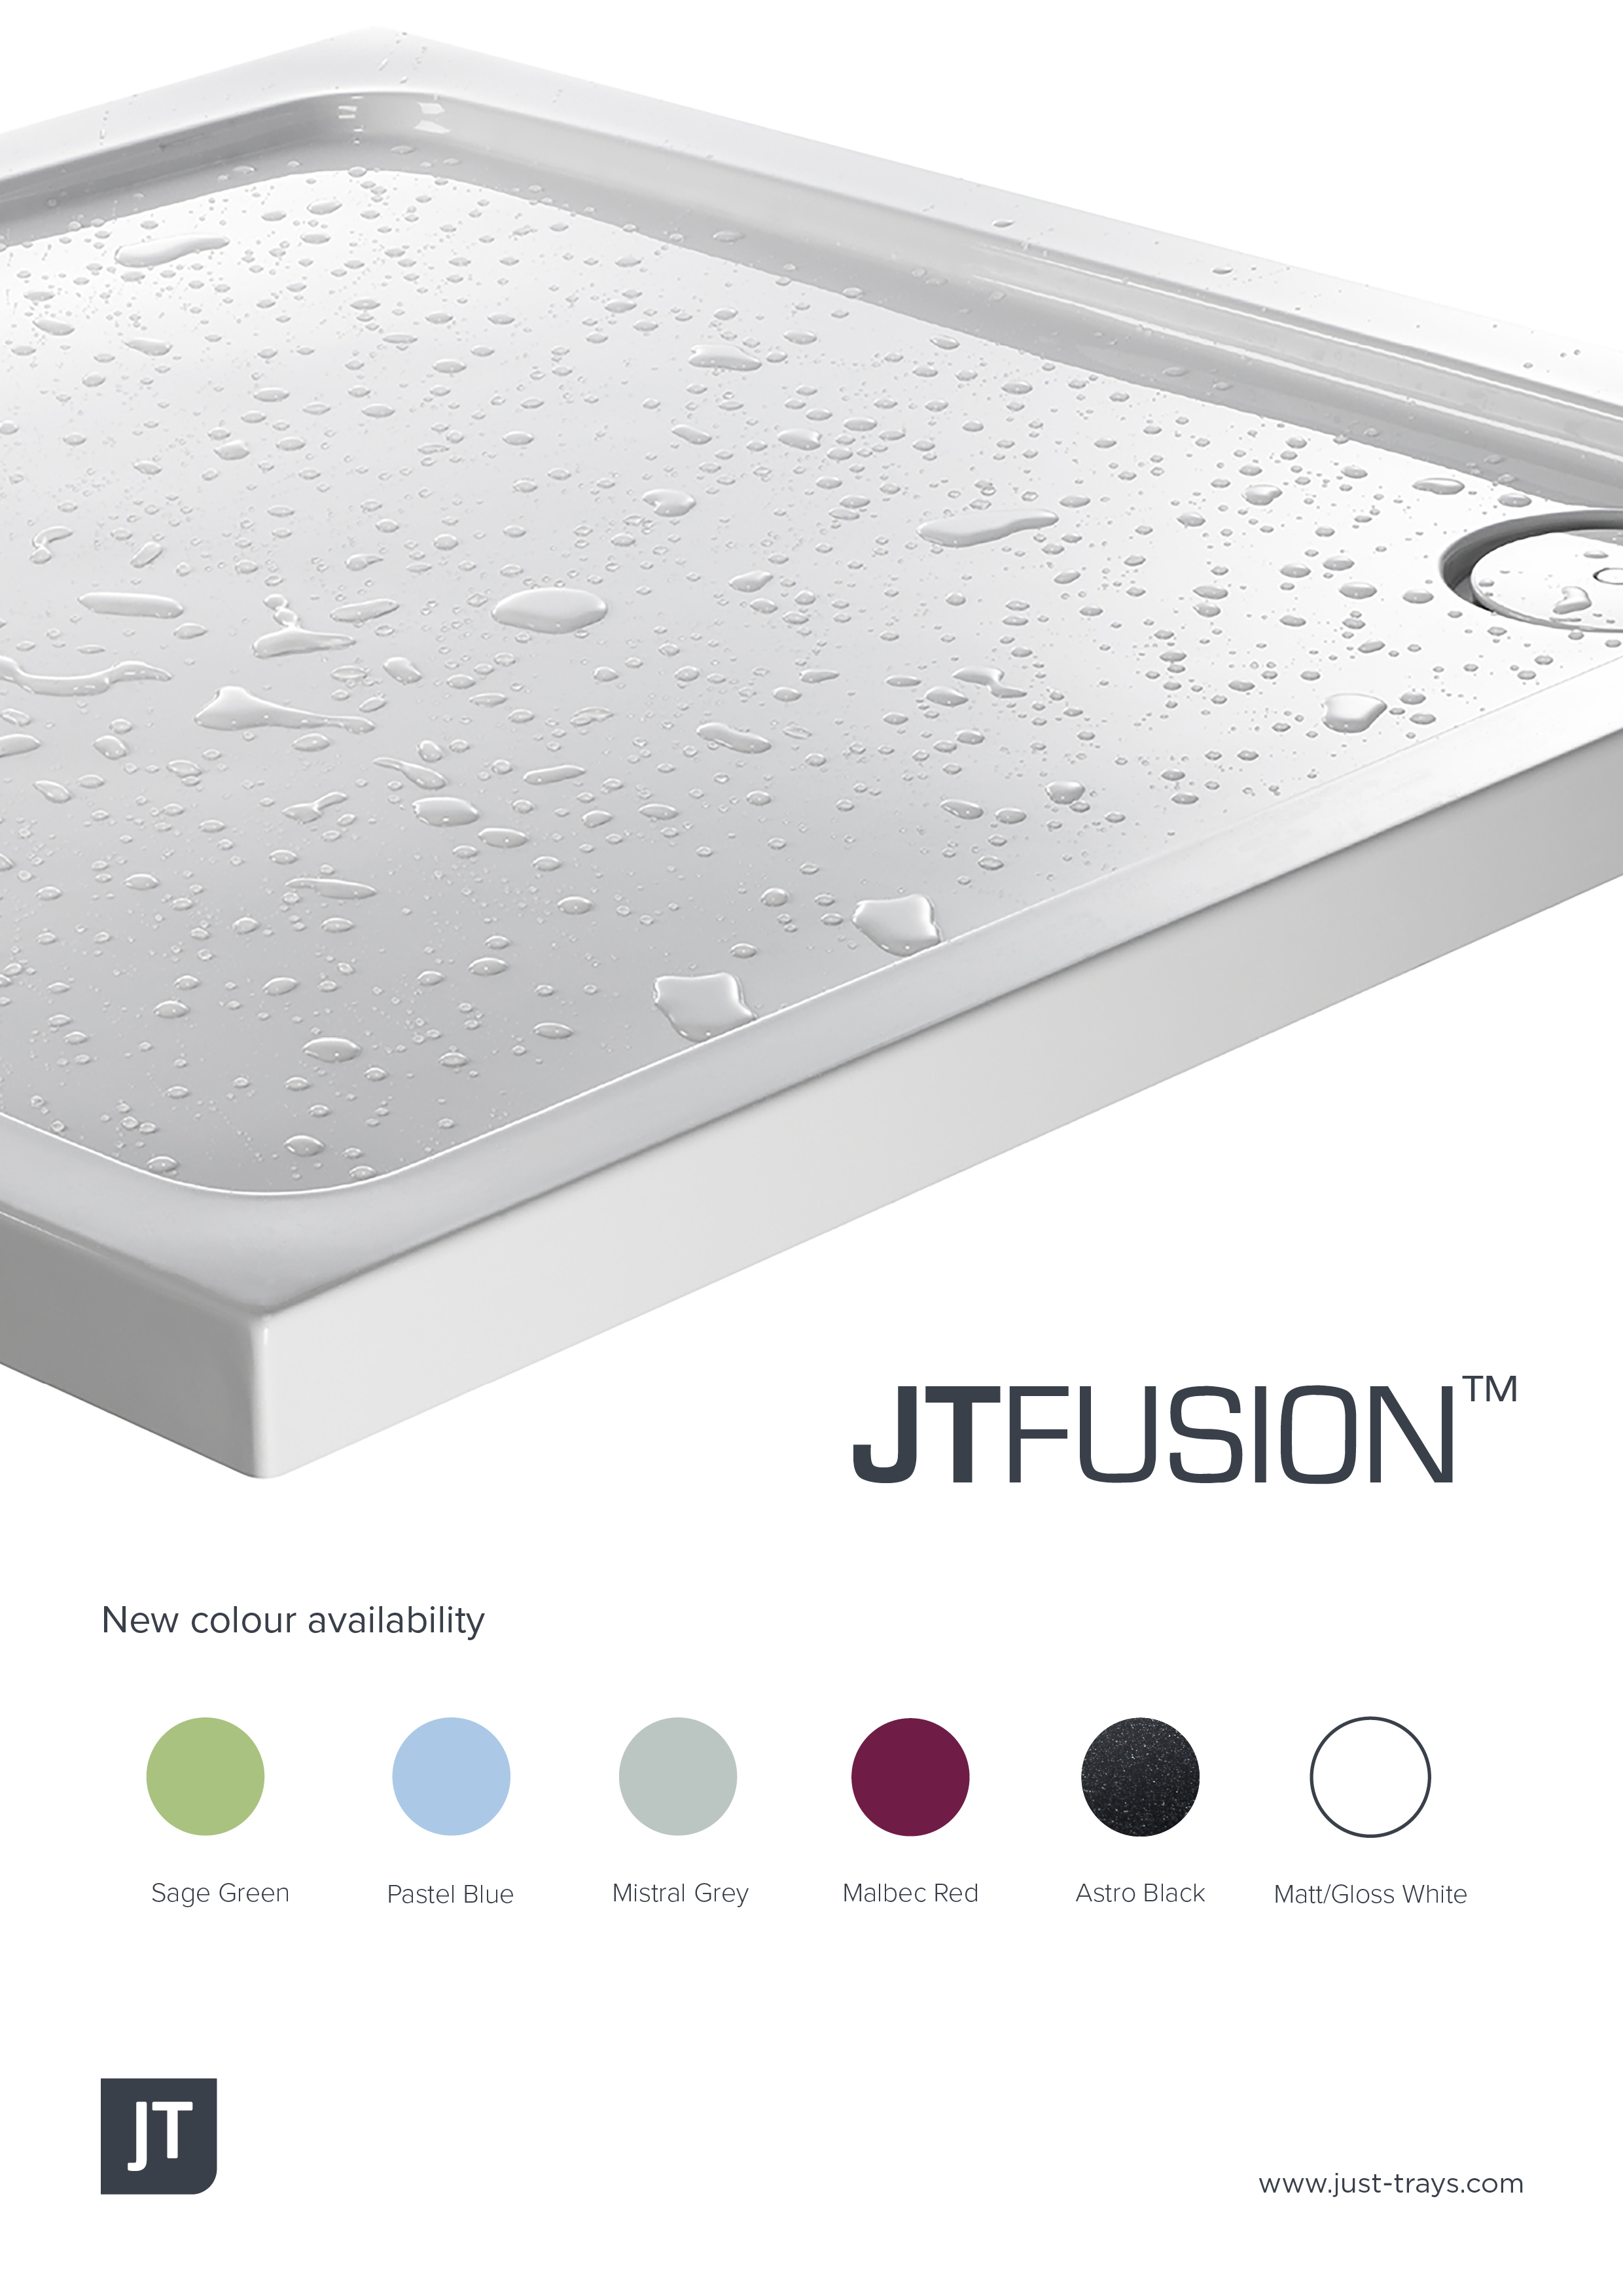 NEW COLOUR OPTIONS FOR JTFUSION